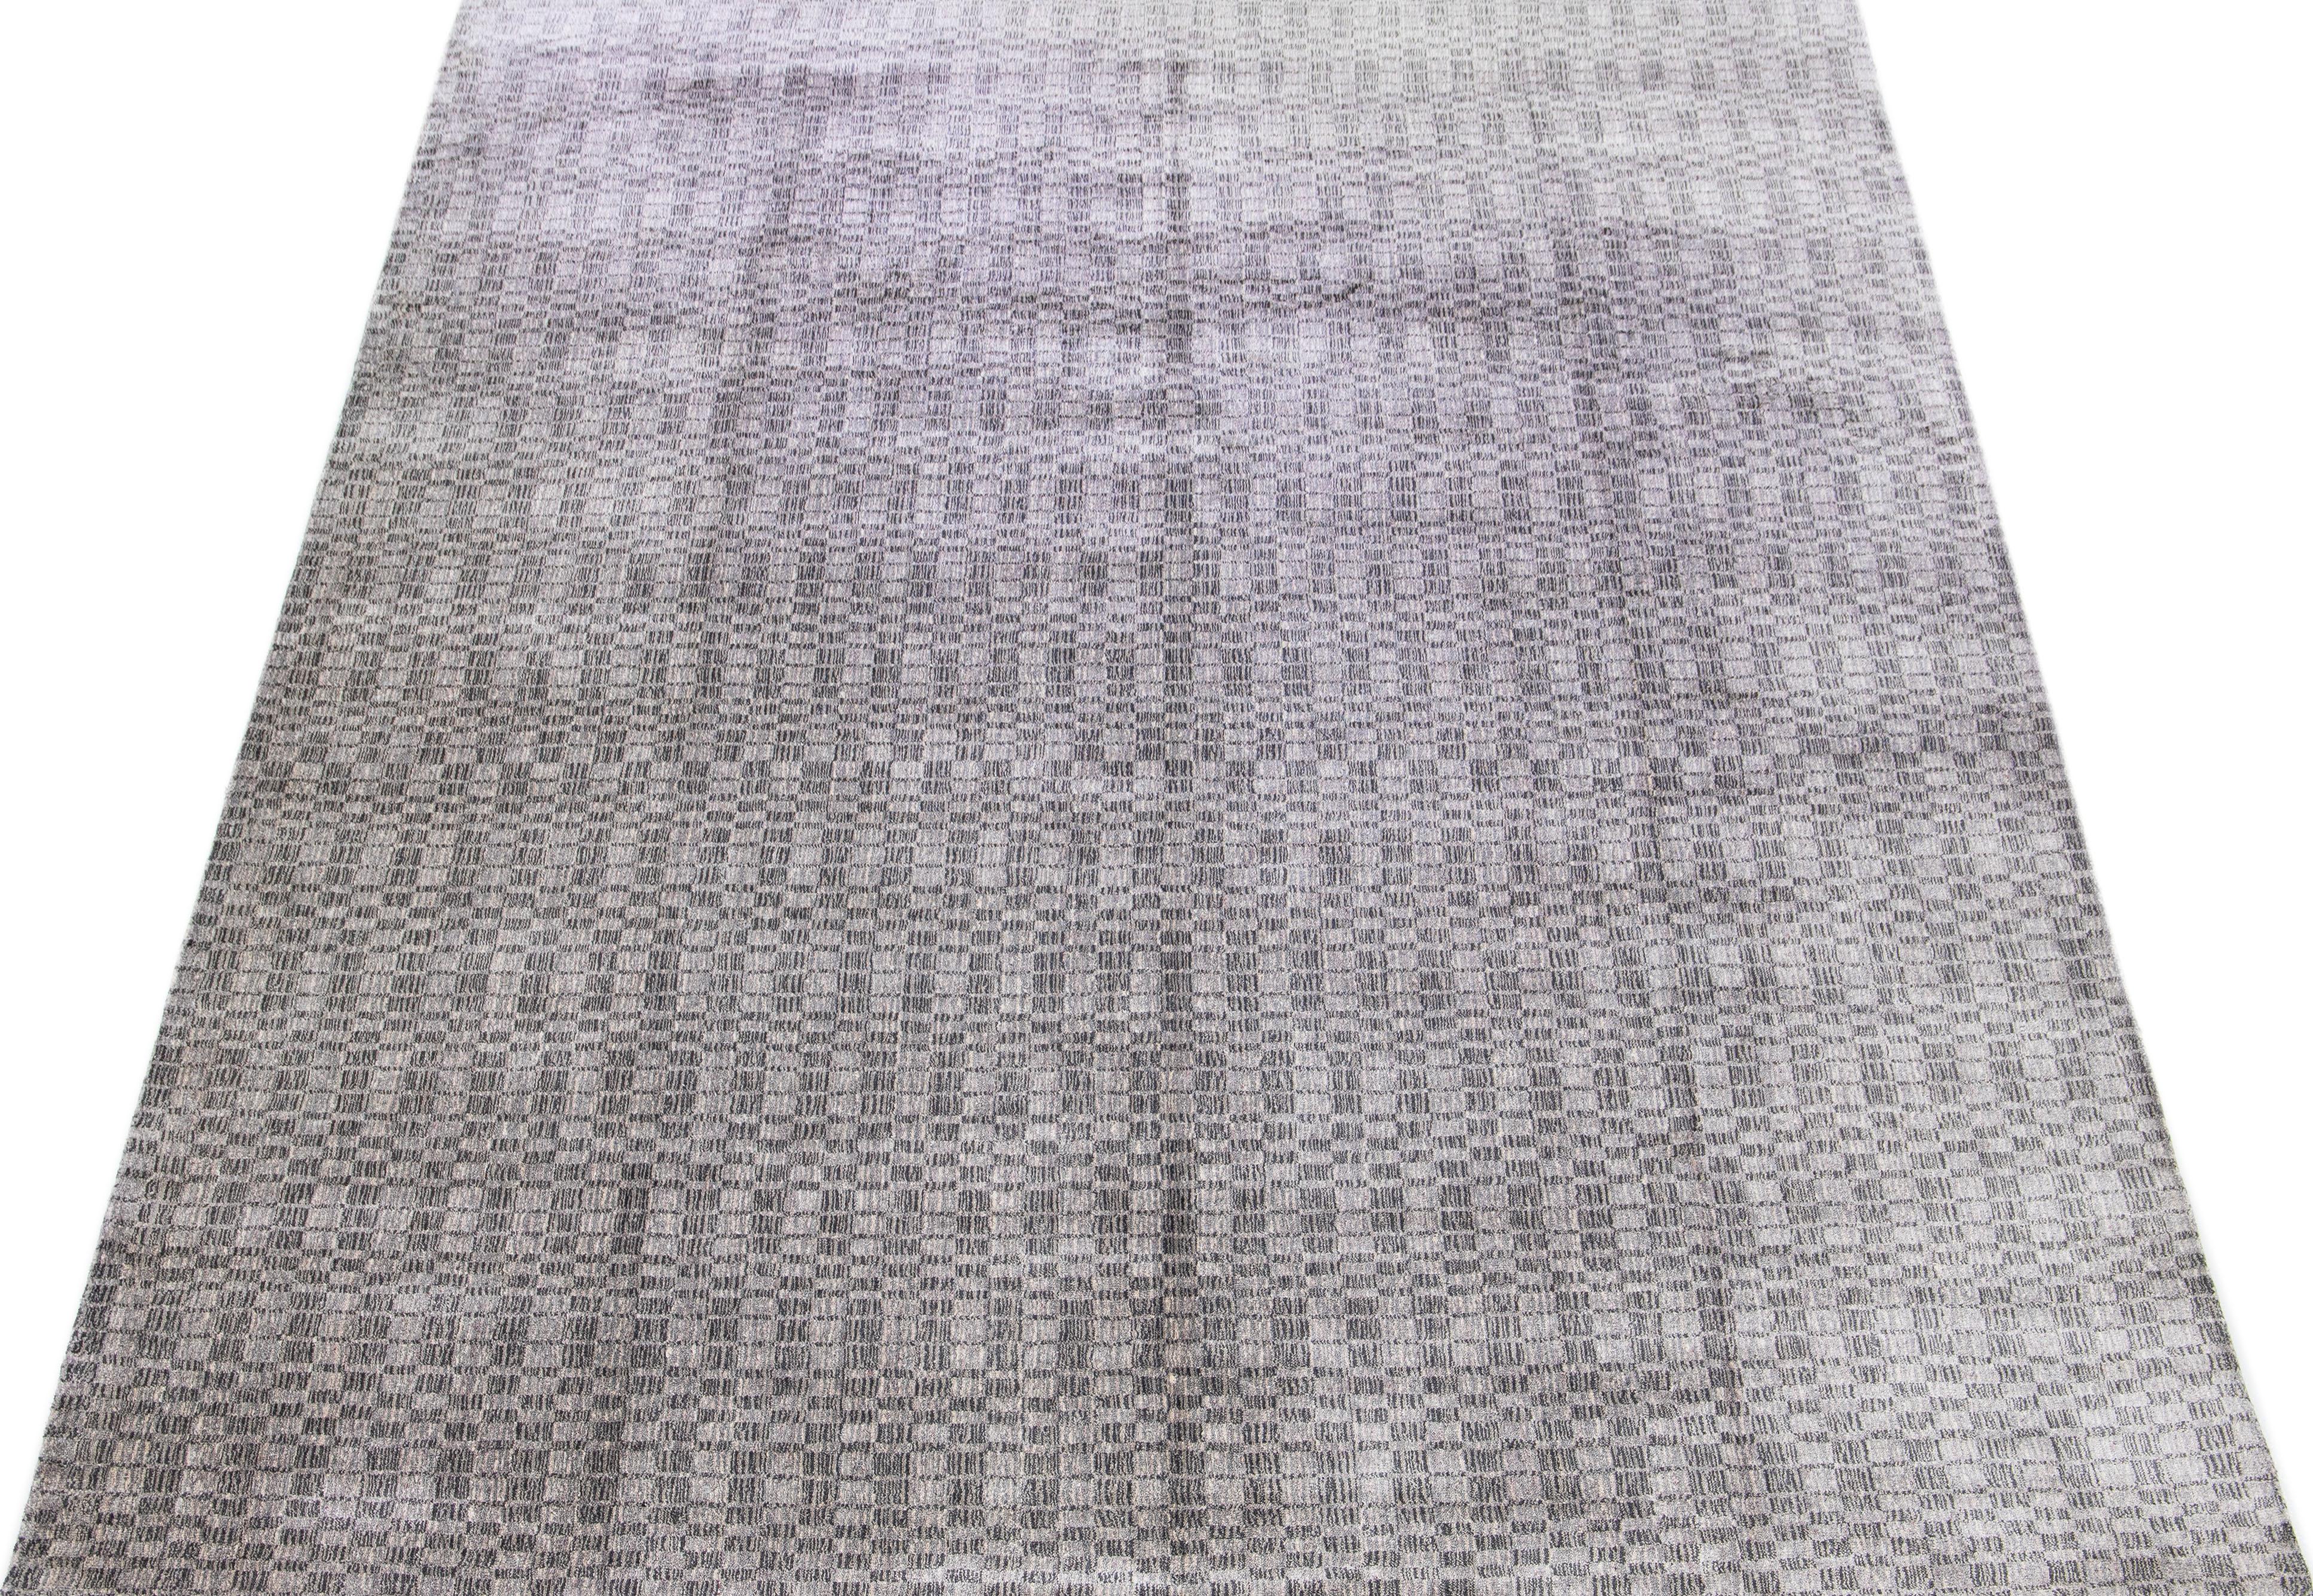 This exquisite contemporary wool and silk rug showcases a striking gray-silver base adorned with a stunning geometric pattern that gracefully flows from end to end.

This rug measures 10' x 14'.

Our rugs are professional cleaning before